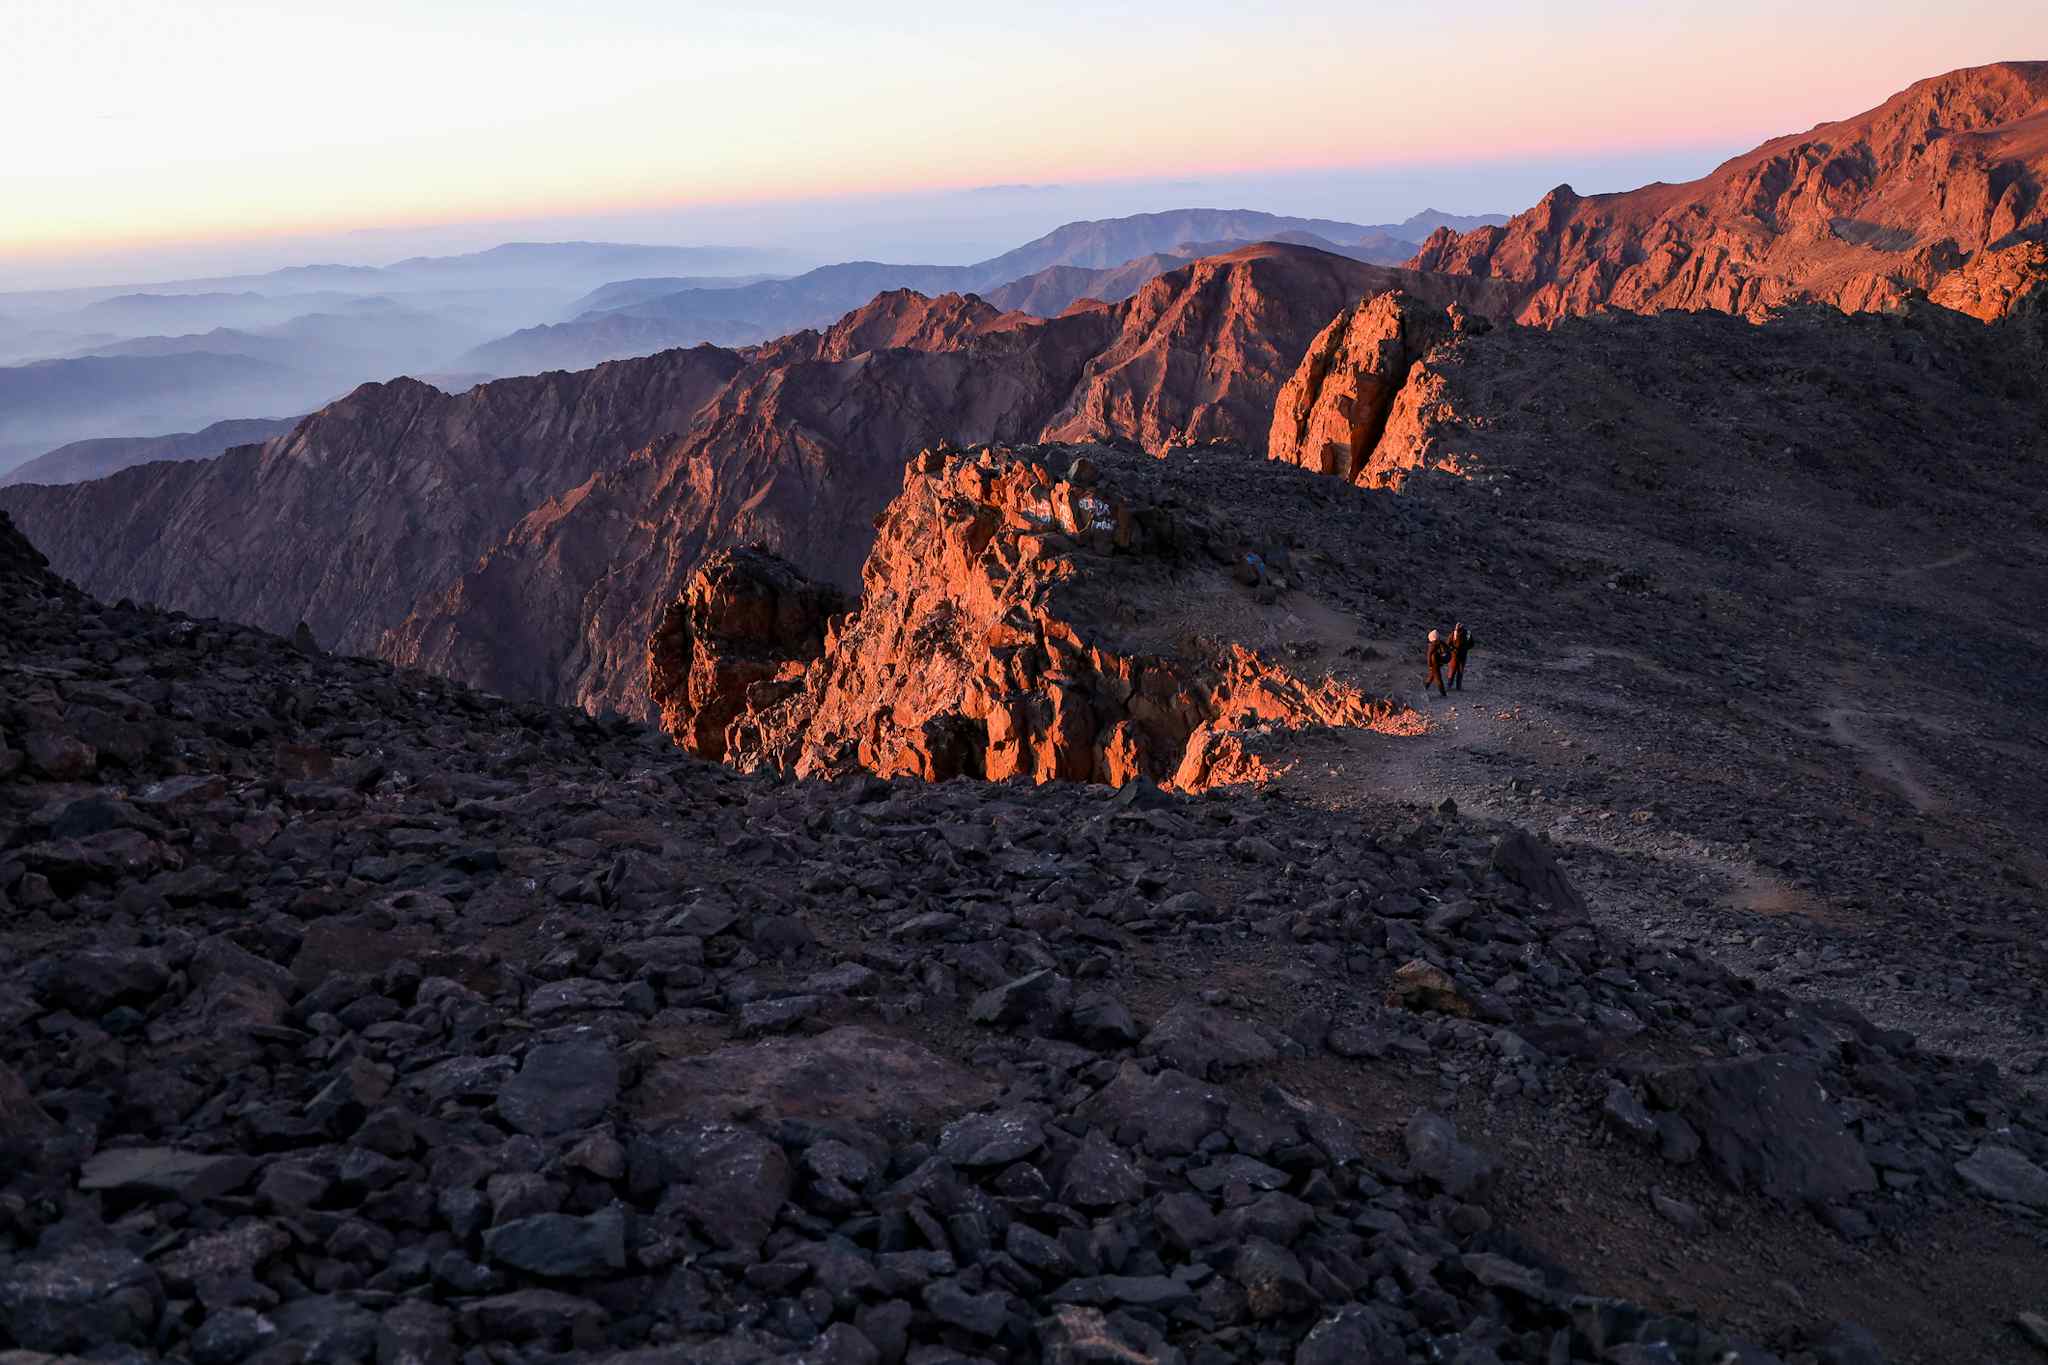 The rocky, dusty slopes of Morocco's Mount Toubkal at sunrise. 